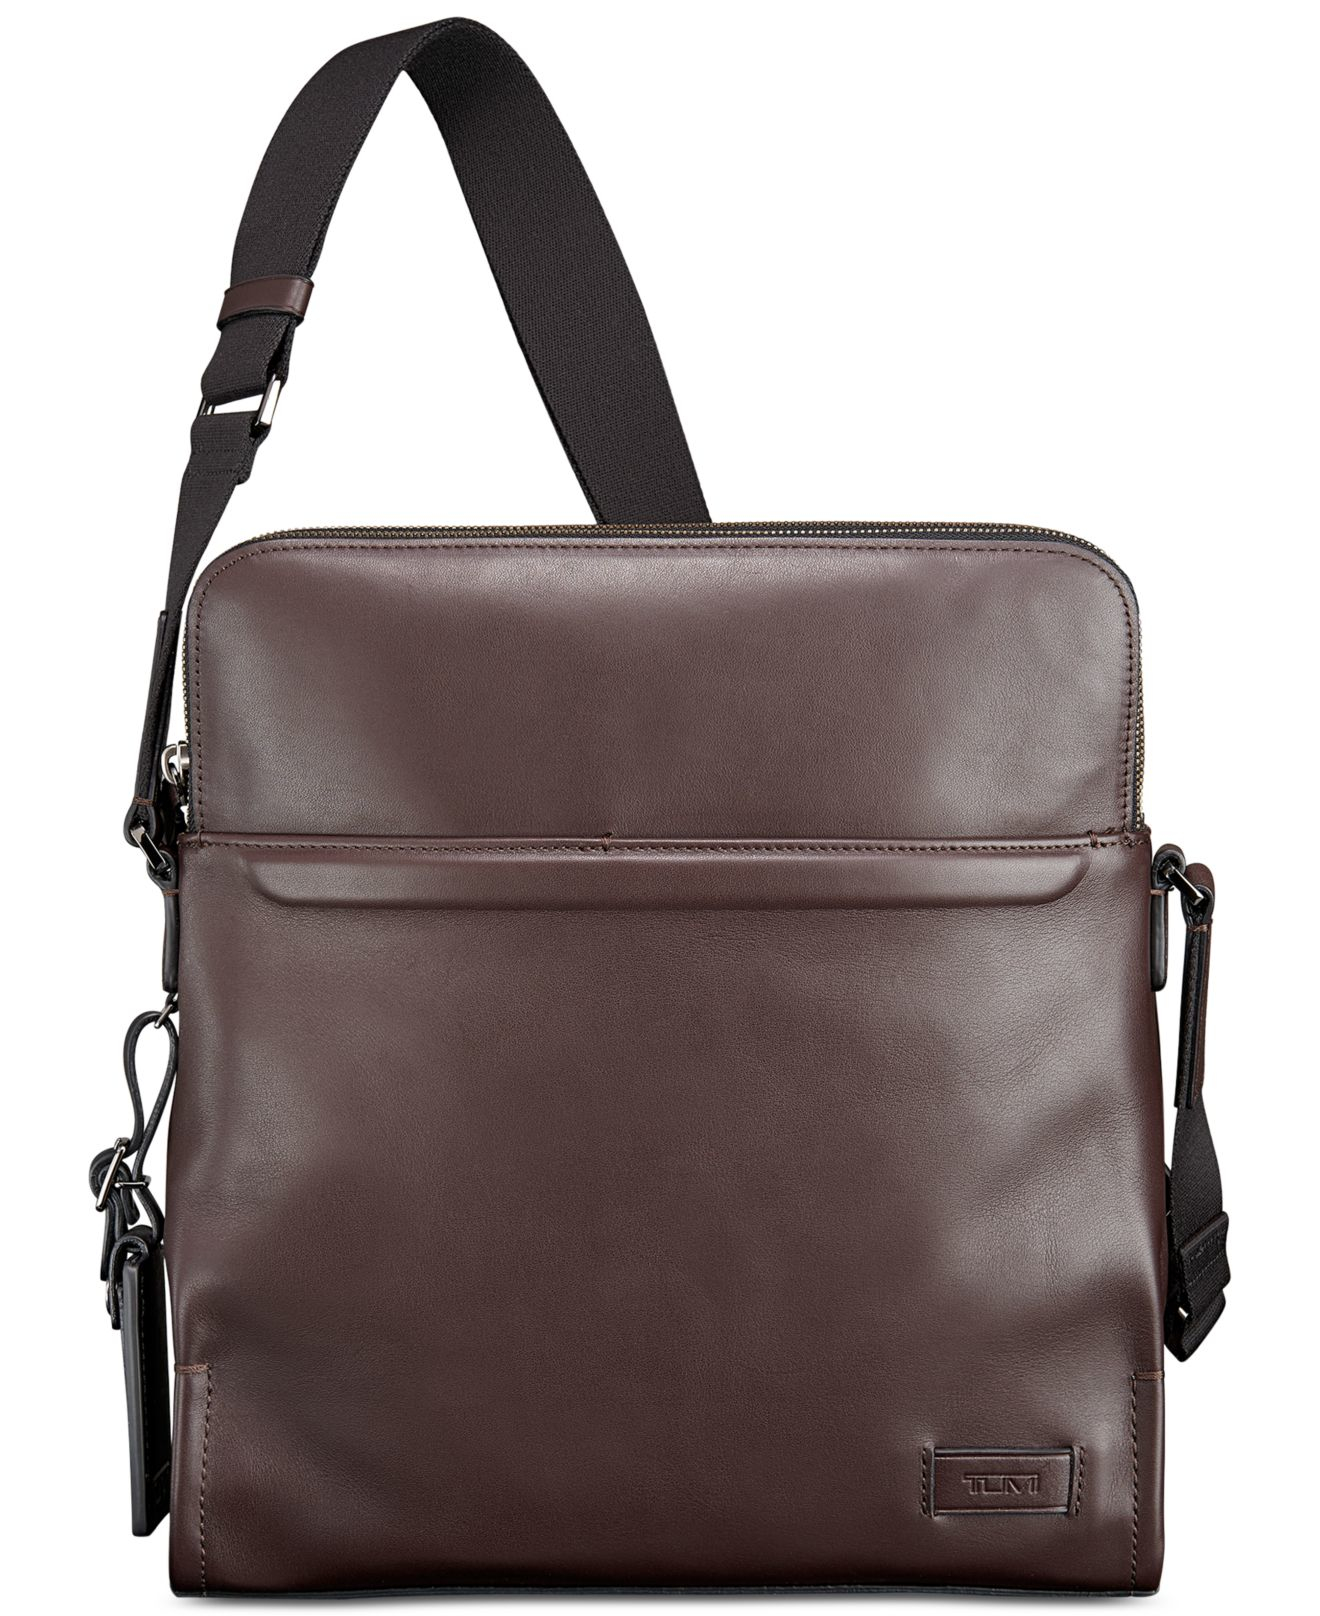 Harrison Stratton Leather Bag in Brown | Lyst